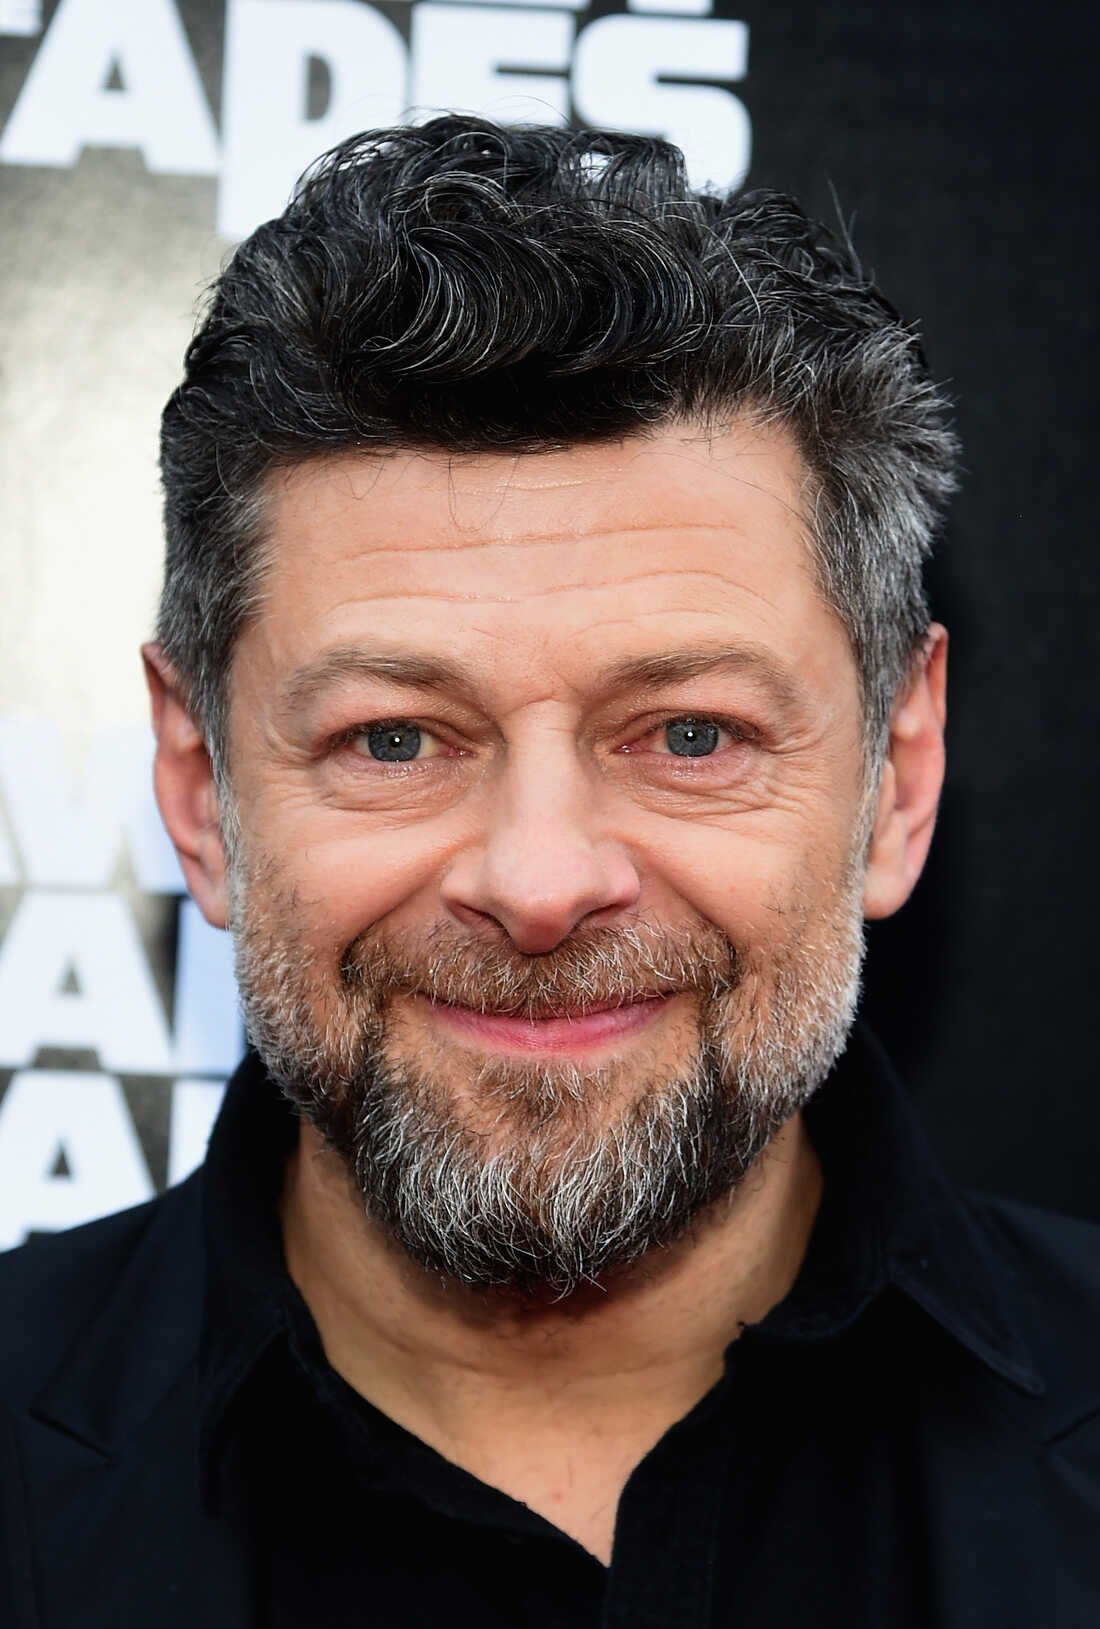 Andy Serkis To Direct Animated Adaptation Of George Orwell's 'Animal Farm